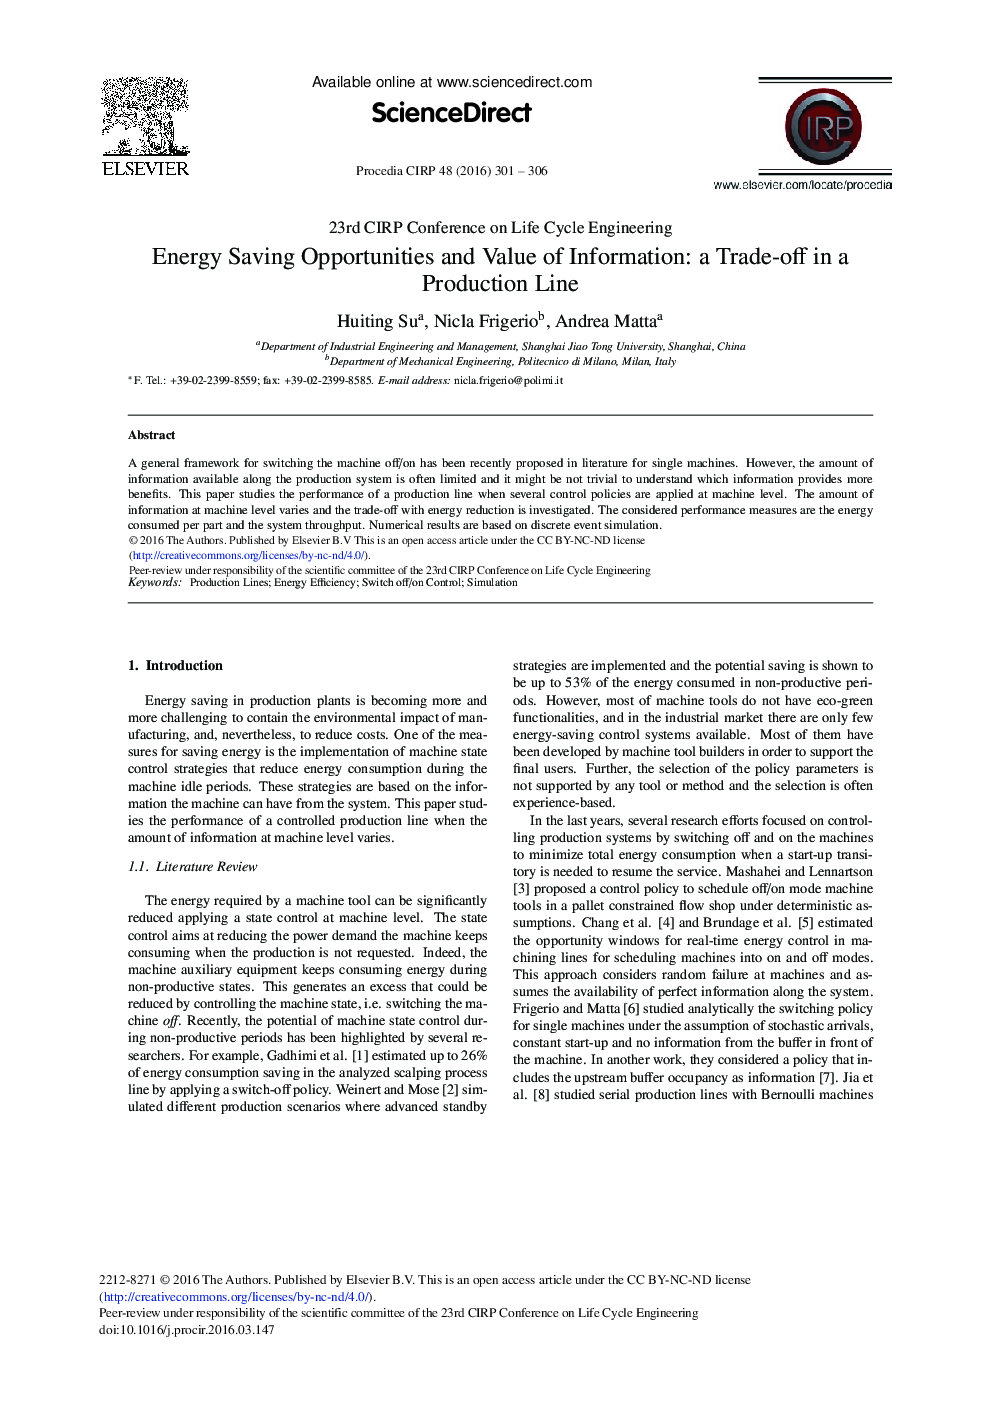 Energy Saving Opportunities and Value of Information: A Trade-off in a Production Line 